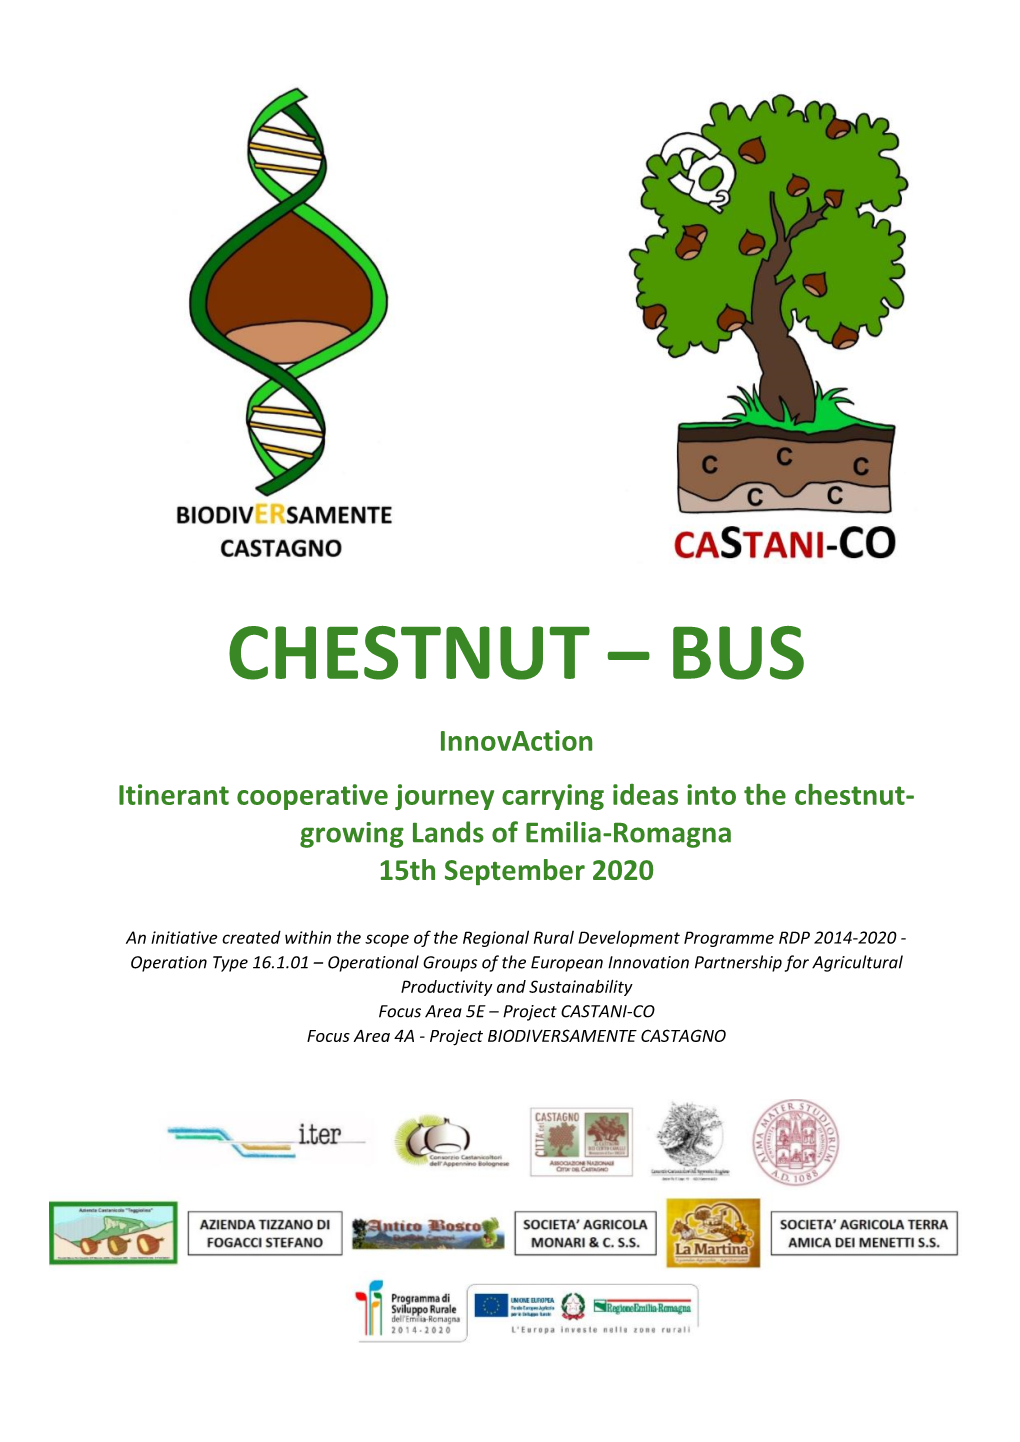 CHESTNUT – BUS Innovaction Itinerant Cooperative Journey Carrying Ideas Into the Chestnut- Growing Lands of Emilia-Romagna 15Th September 2020